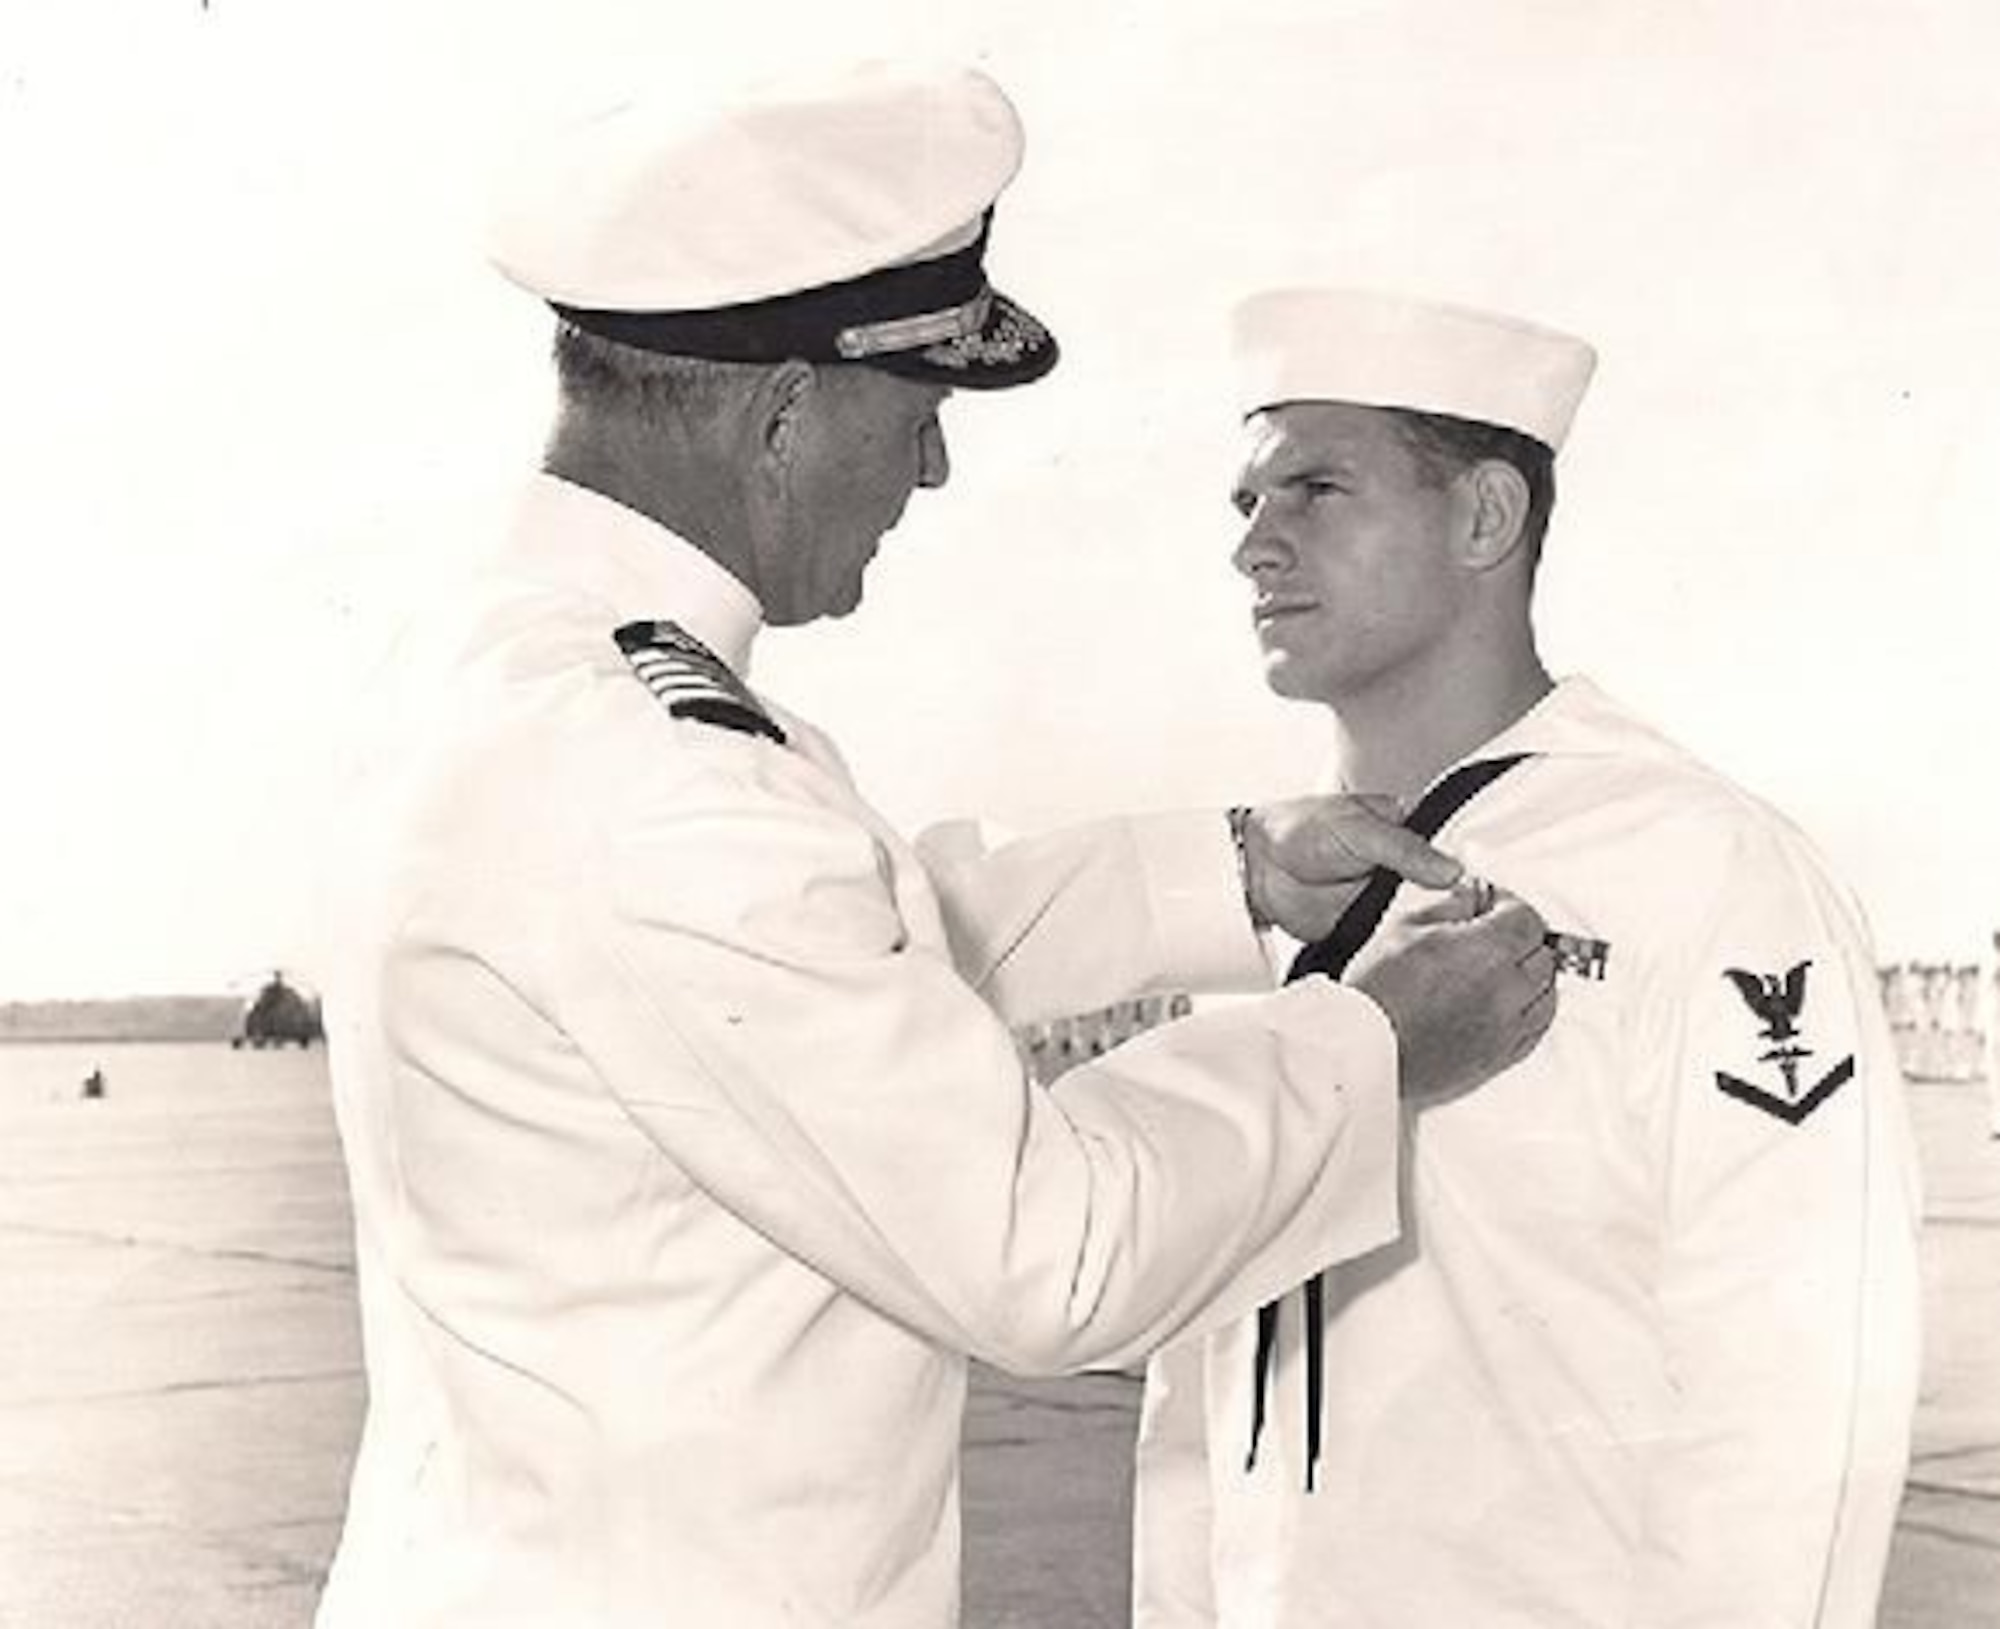 Navy Hospital Corpsman 3rd Class Michael Kuklenski receives a Silver Star in April 1970 at the Albany, Ga., Naval Air Station, for his actions during a May 29, 1969, firefight in Quang Nam province while serving with Alpha Co., 1st Bn., 7th Marines. Kuklenski, who was wounded three times in the engagement, “fearlessly crawled across the fire-swept terrain to reach wounded Marines and administer first aid.” He “continued to provide medical care to the other casualties” before accepting treatment for himself, according to his Silver Star citation. (Photo by Michael Kuklenski)